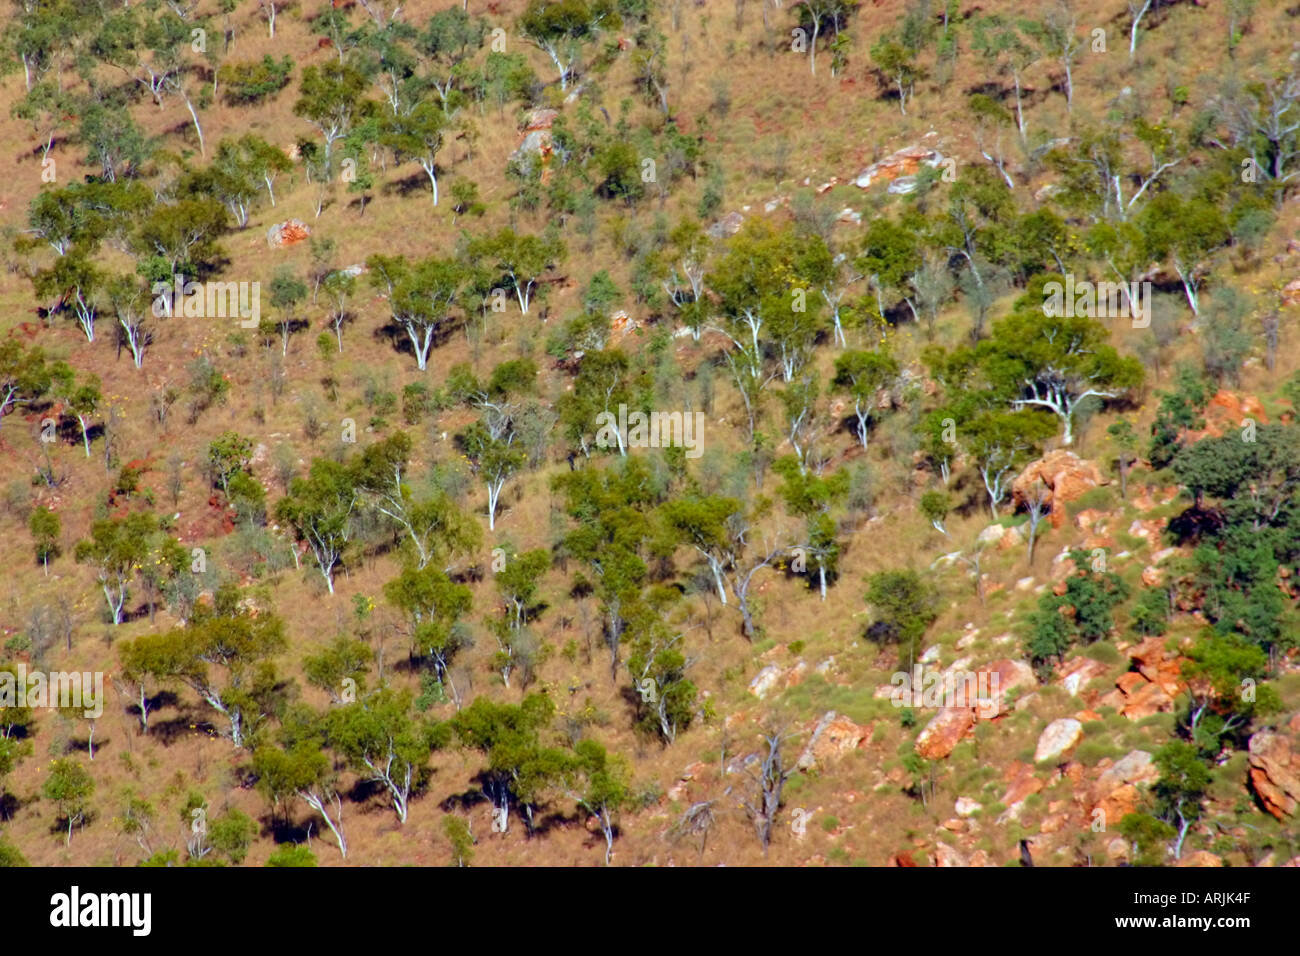 Rocky outcrops with trees and spinifex on banks of Lake Argyle near Kununurra Western Australia Stock Photo